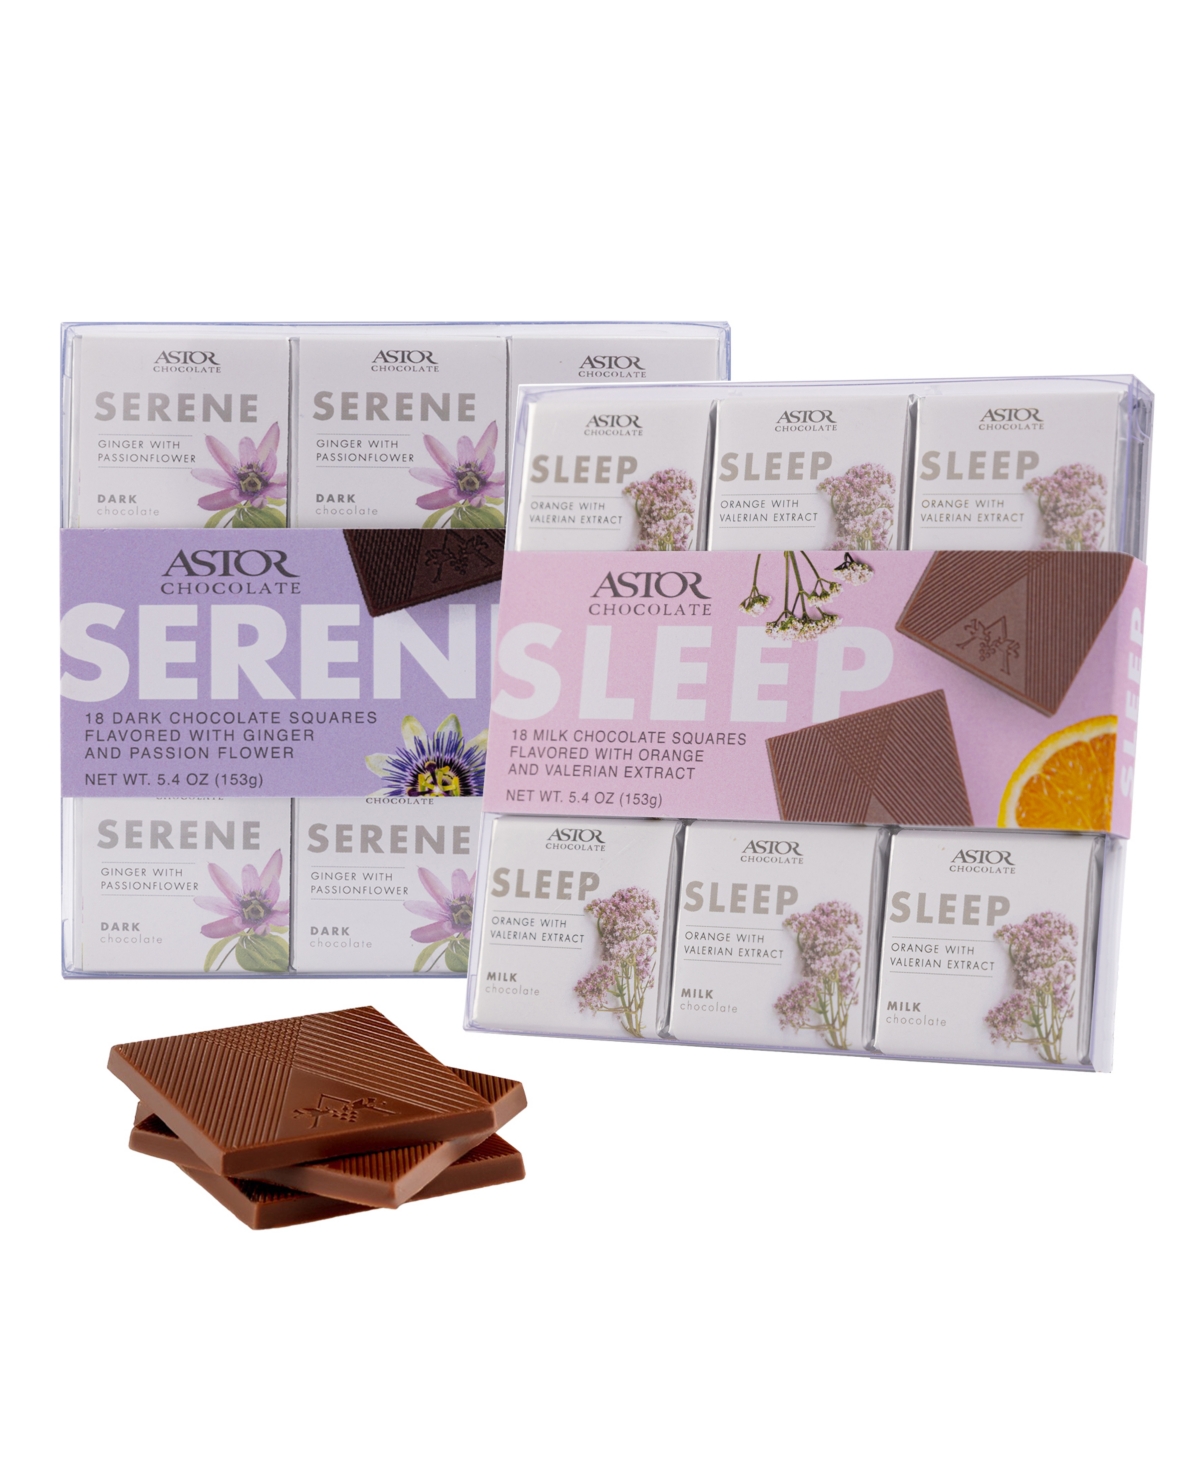 Astor Chocolate Herbal Duo With Deluxe Chocolate Squares In Serene And Sleep 2 Pack Set, 36 Pieces